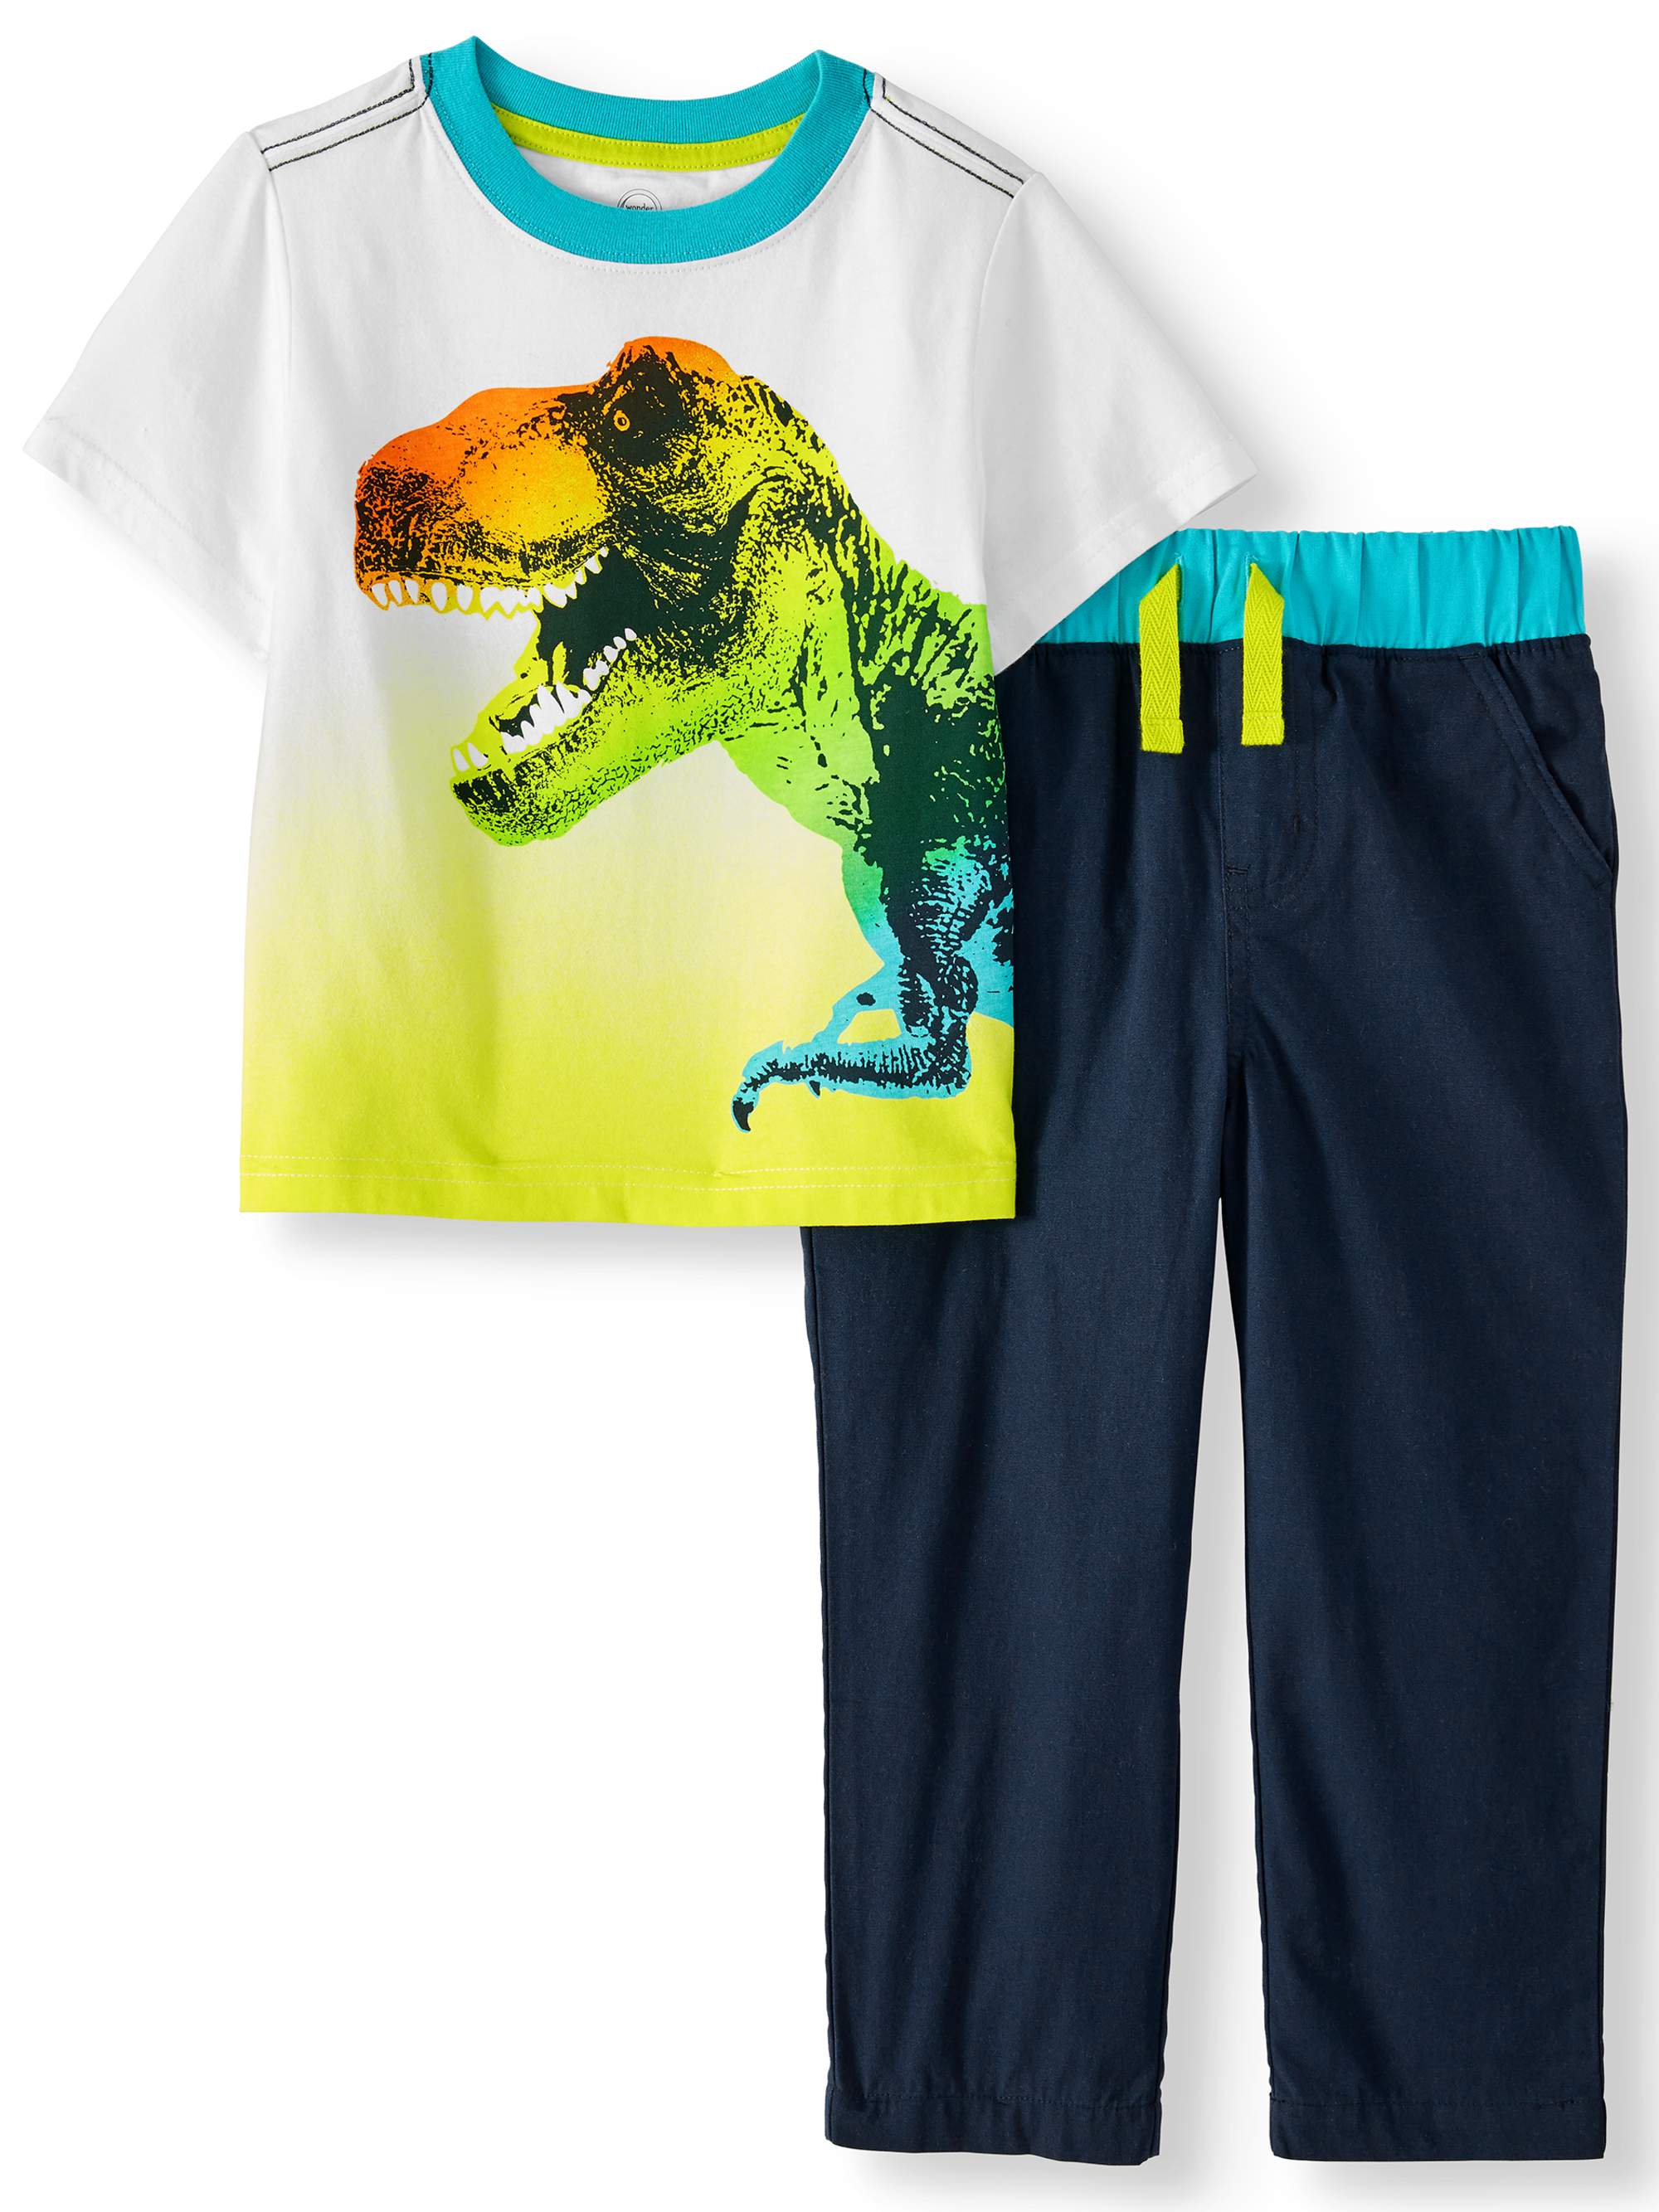 Wonder Nation Toddler Boy T-Shirt and Sweatpants Outfit Set, 2-Piece, Sizes 2T-5T - image 1 of 3